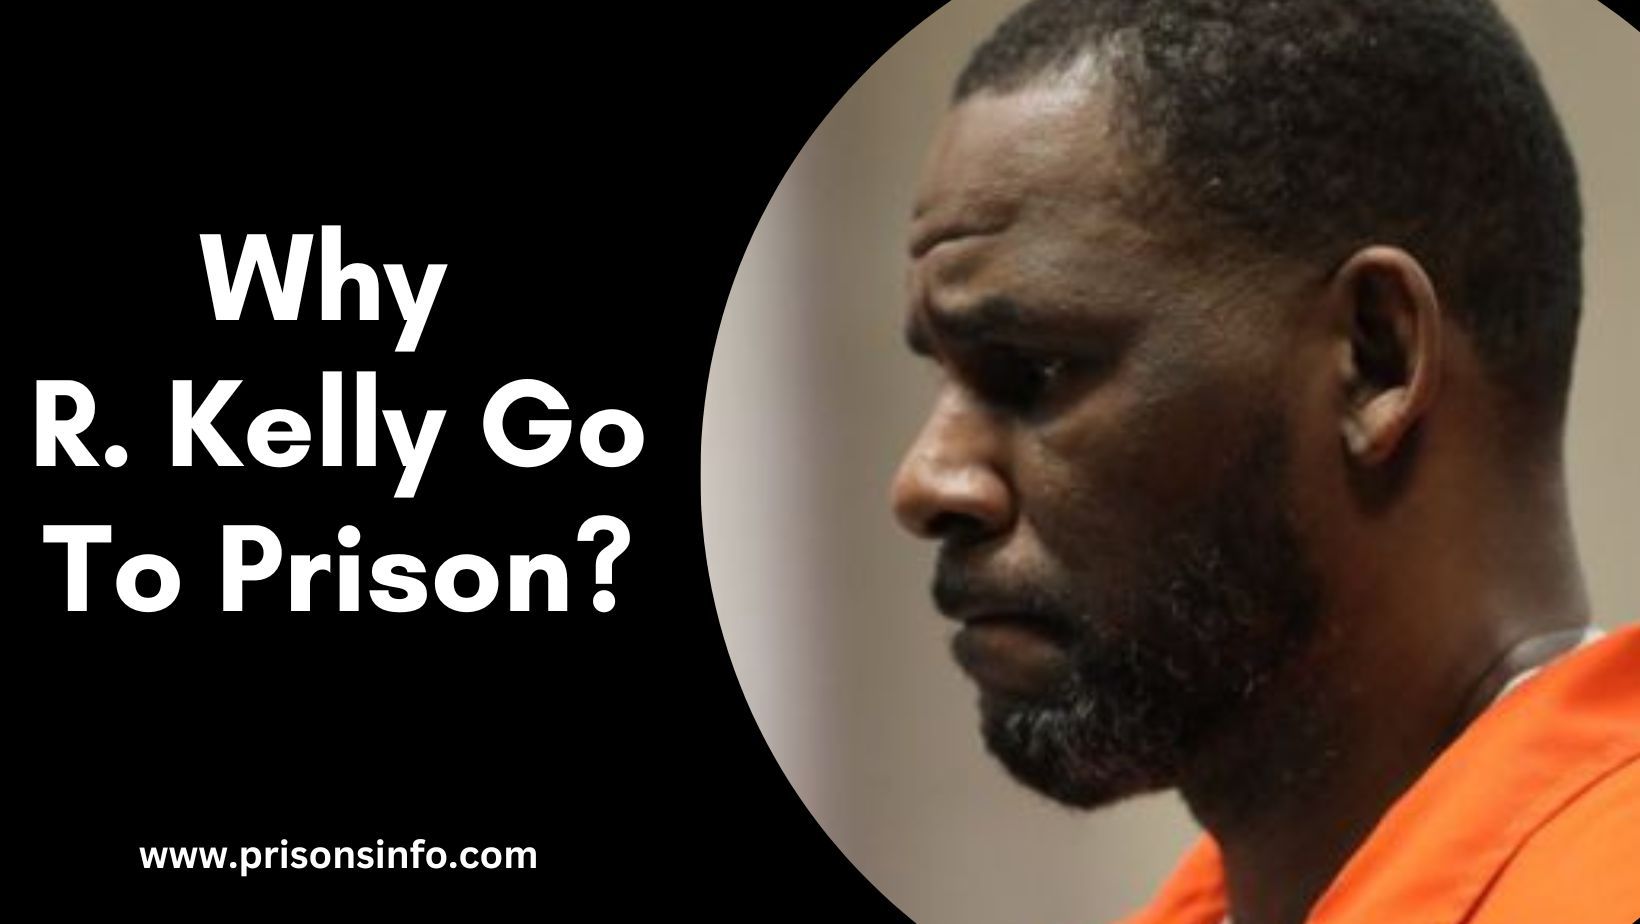 Why R. Kelly Go To Prison